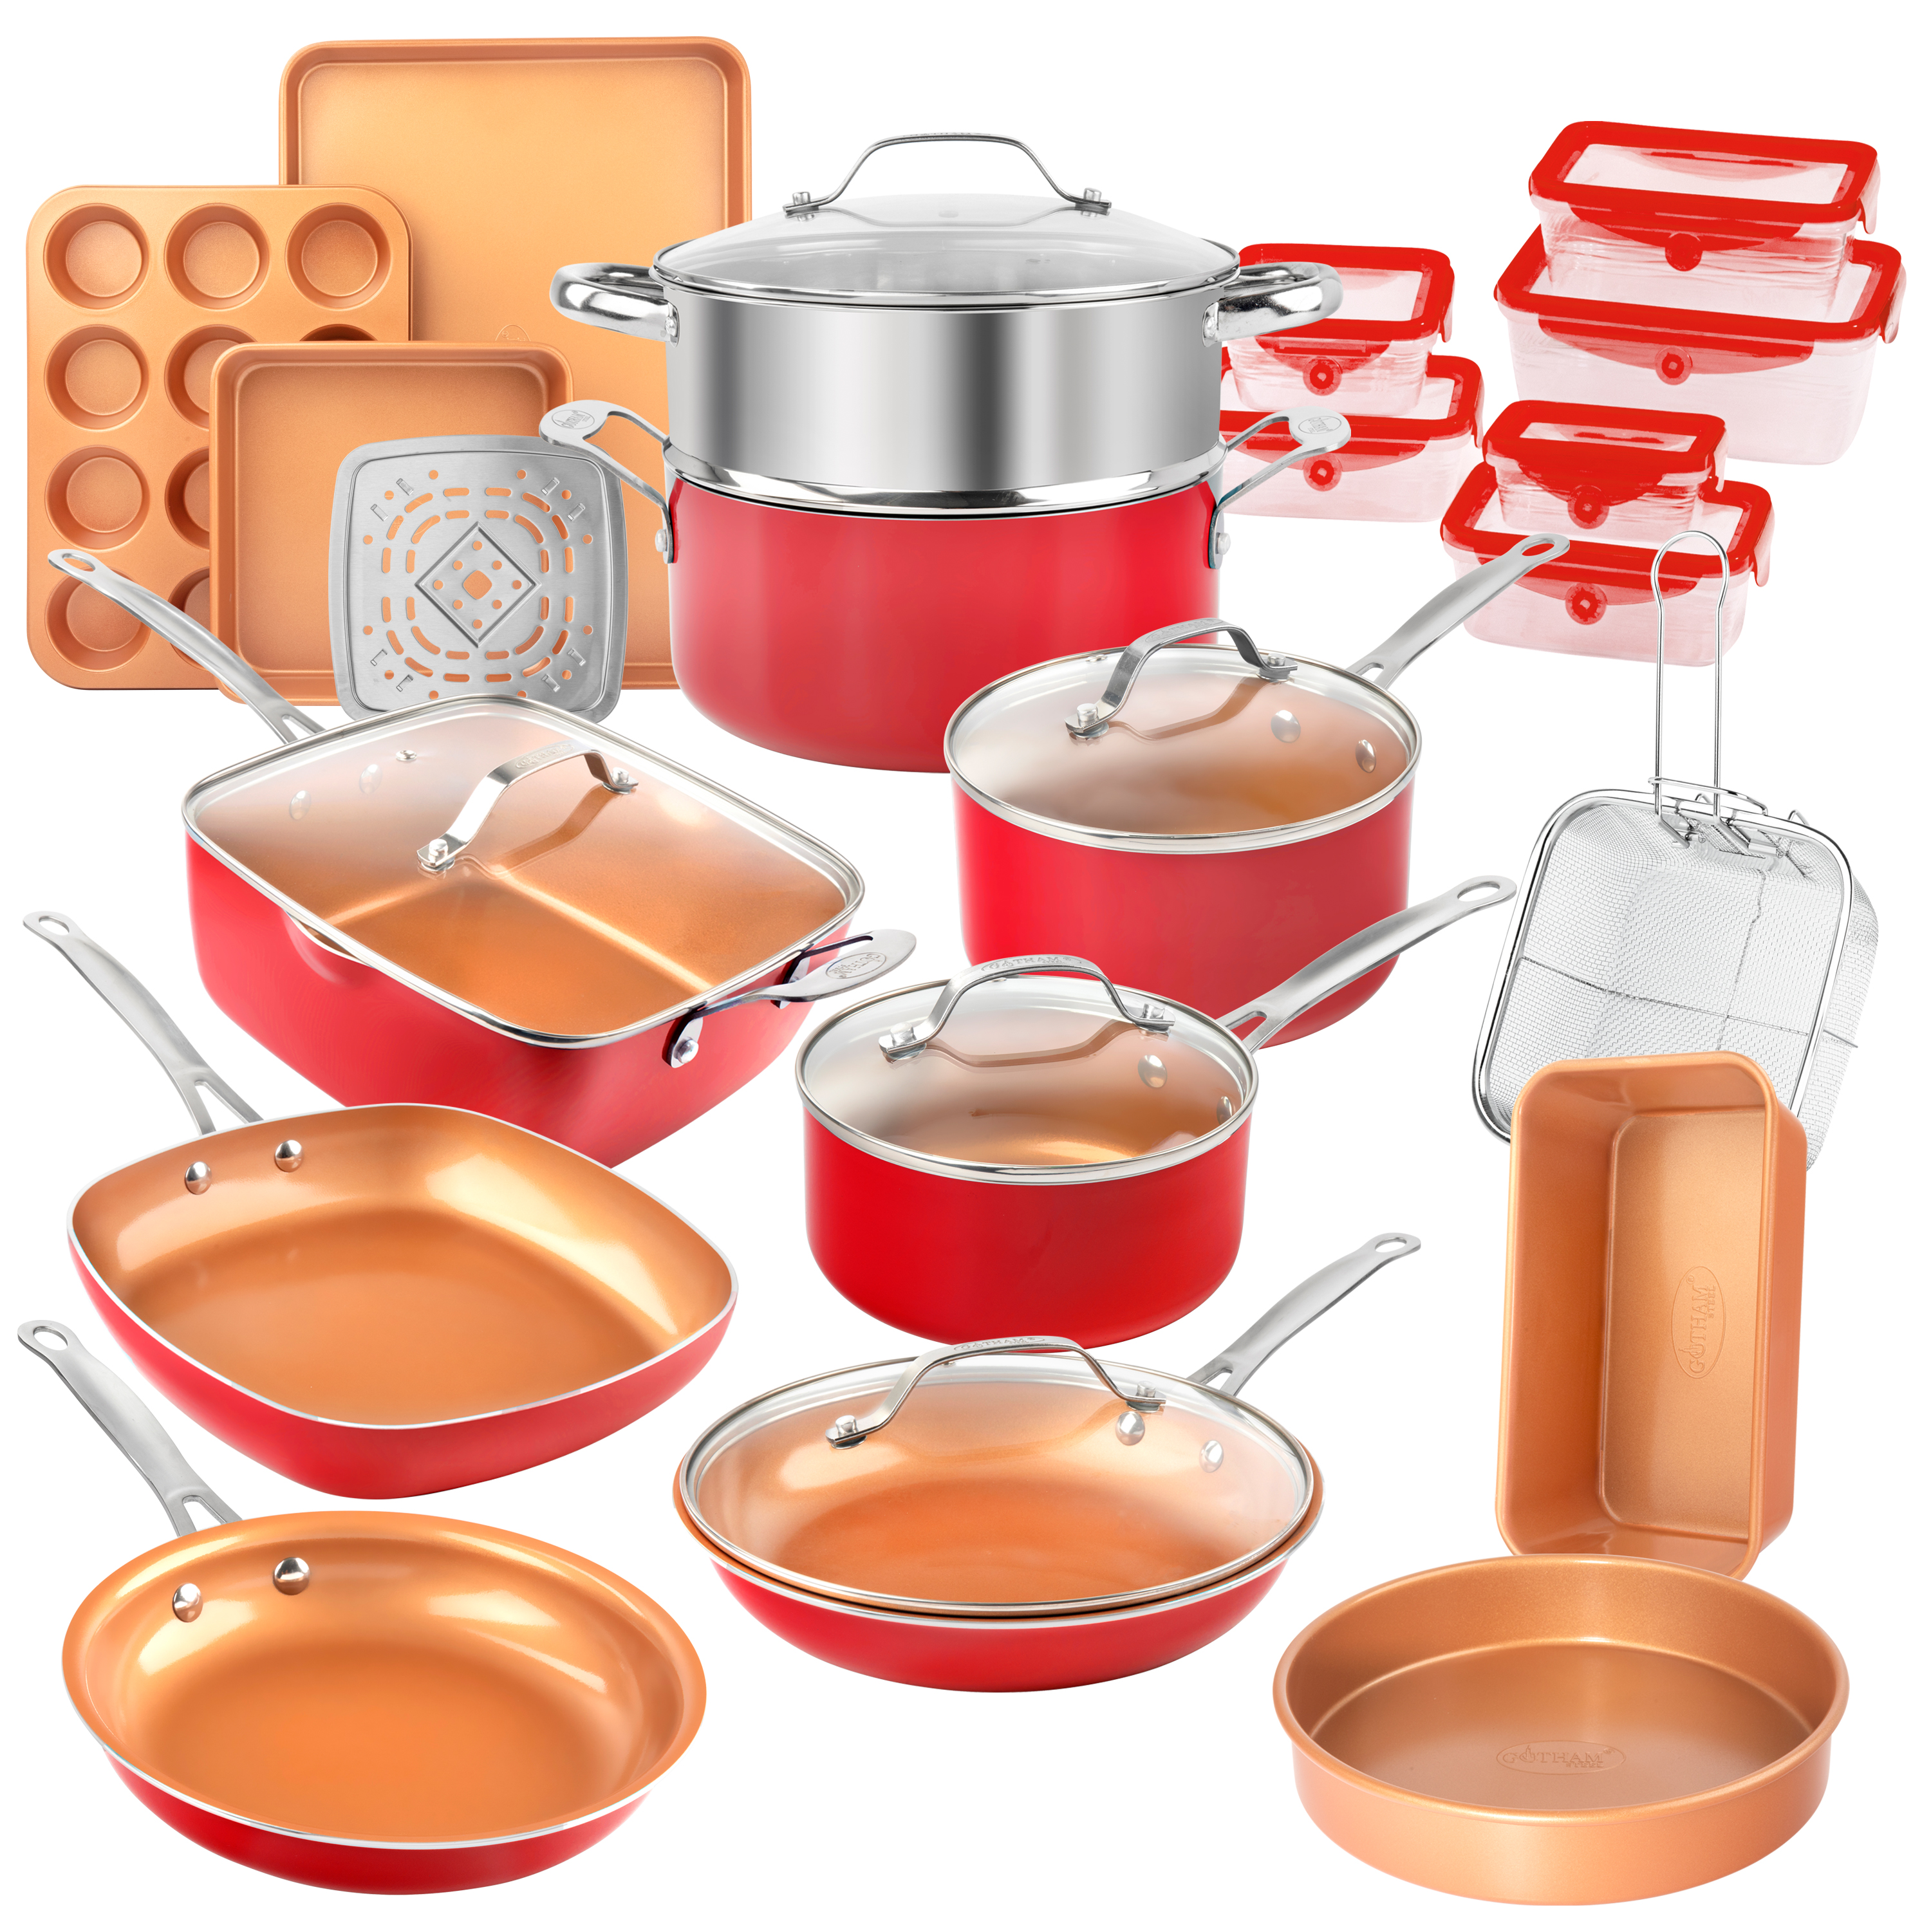 Gotham Steel 32 Pcs Cookware Set Bakeware and Food Storage Set Nonstick Pots and Pans Set Red - image 1 of 11